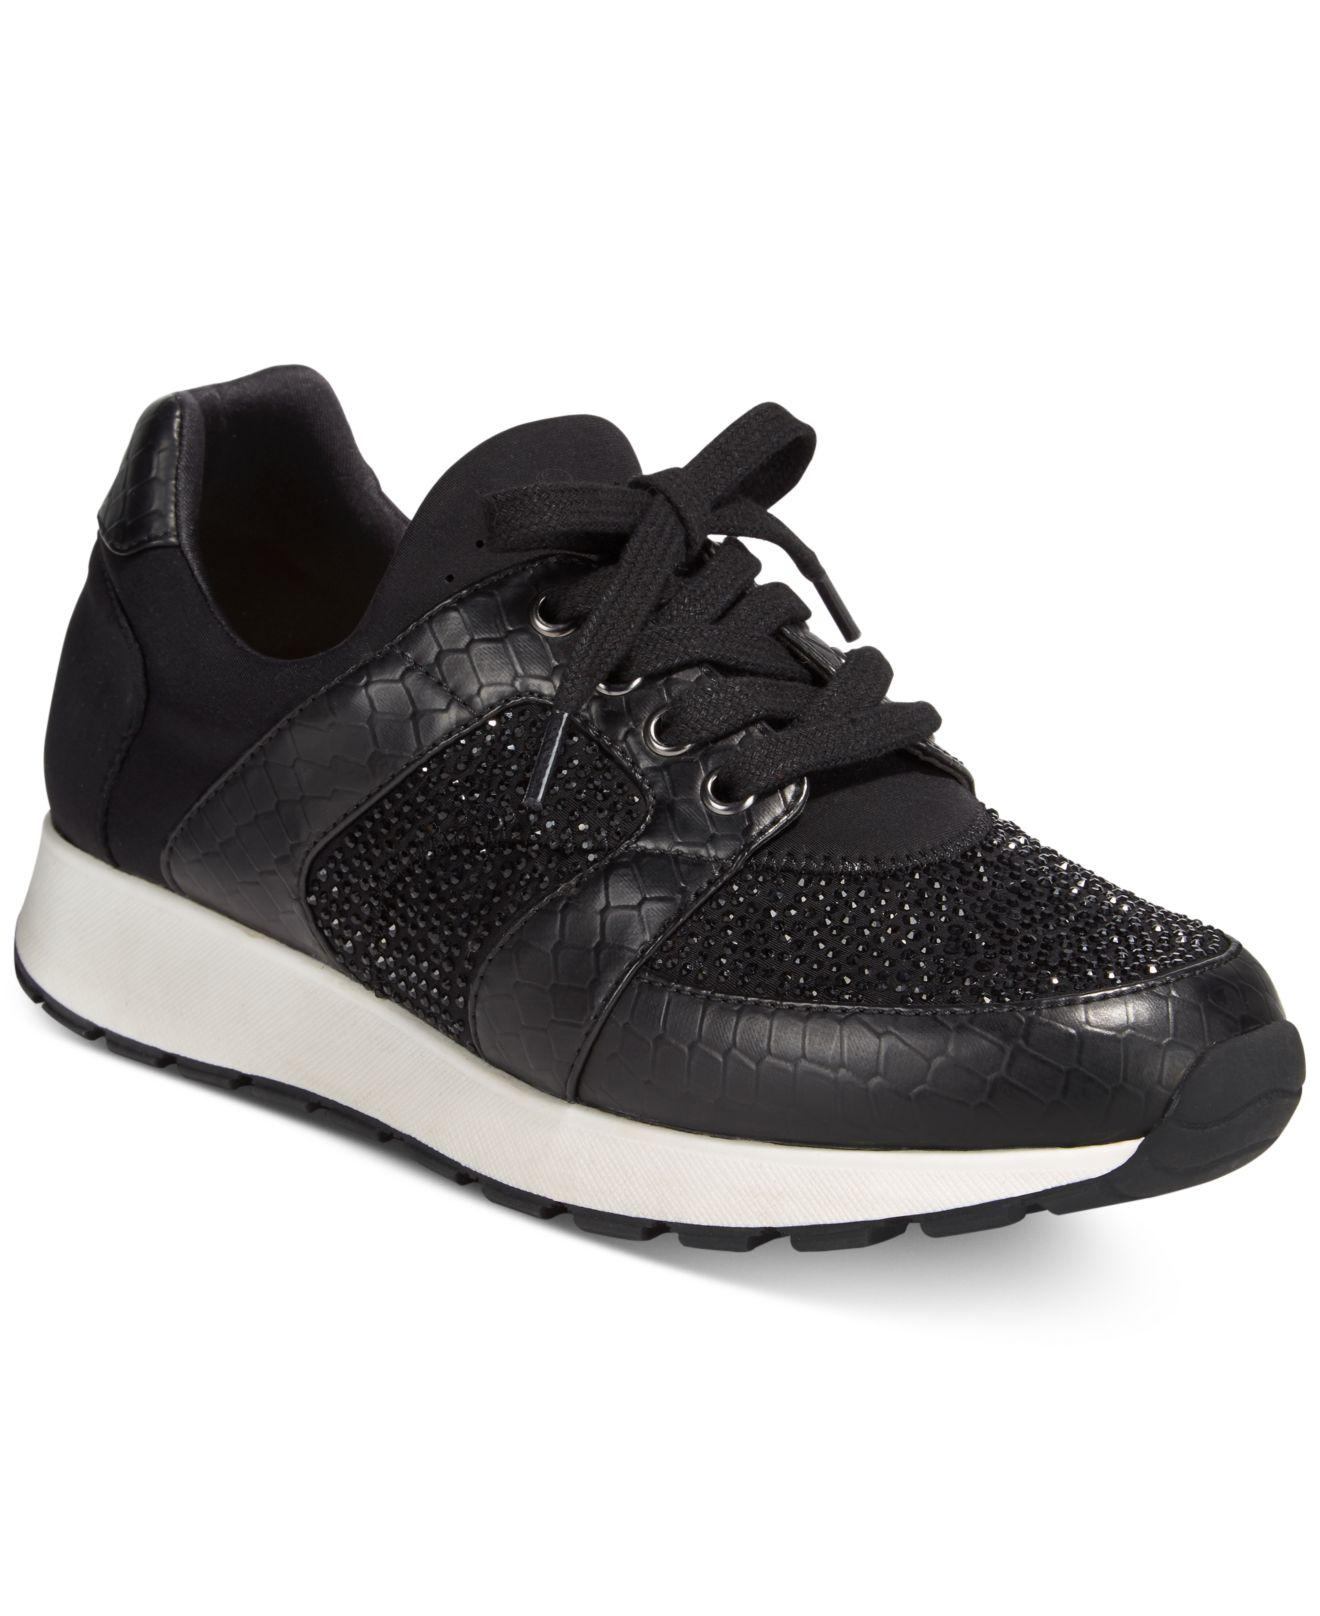 Lyst - Inc International Concepts Pakiss Embellished Sneakers in Black